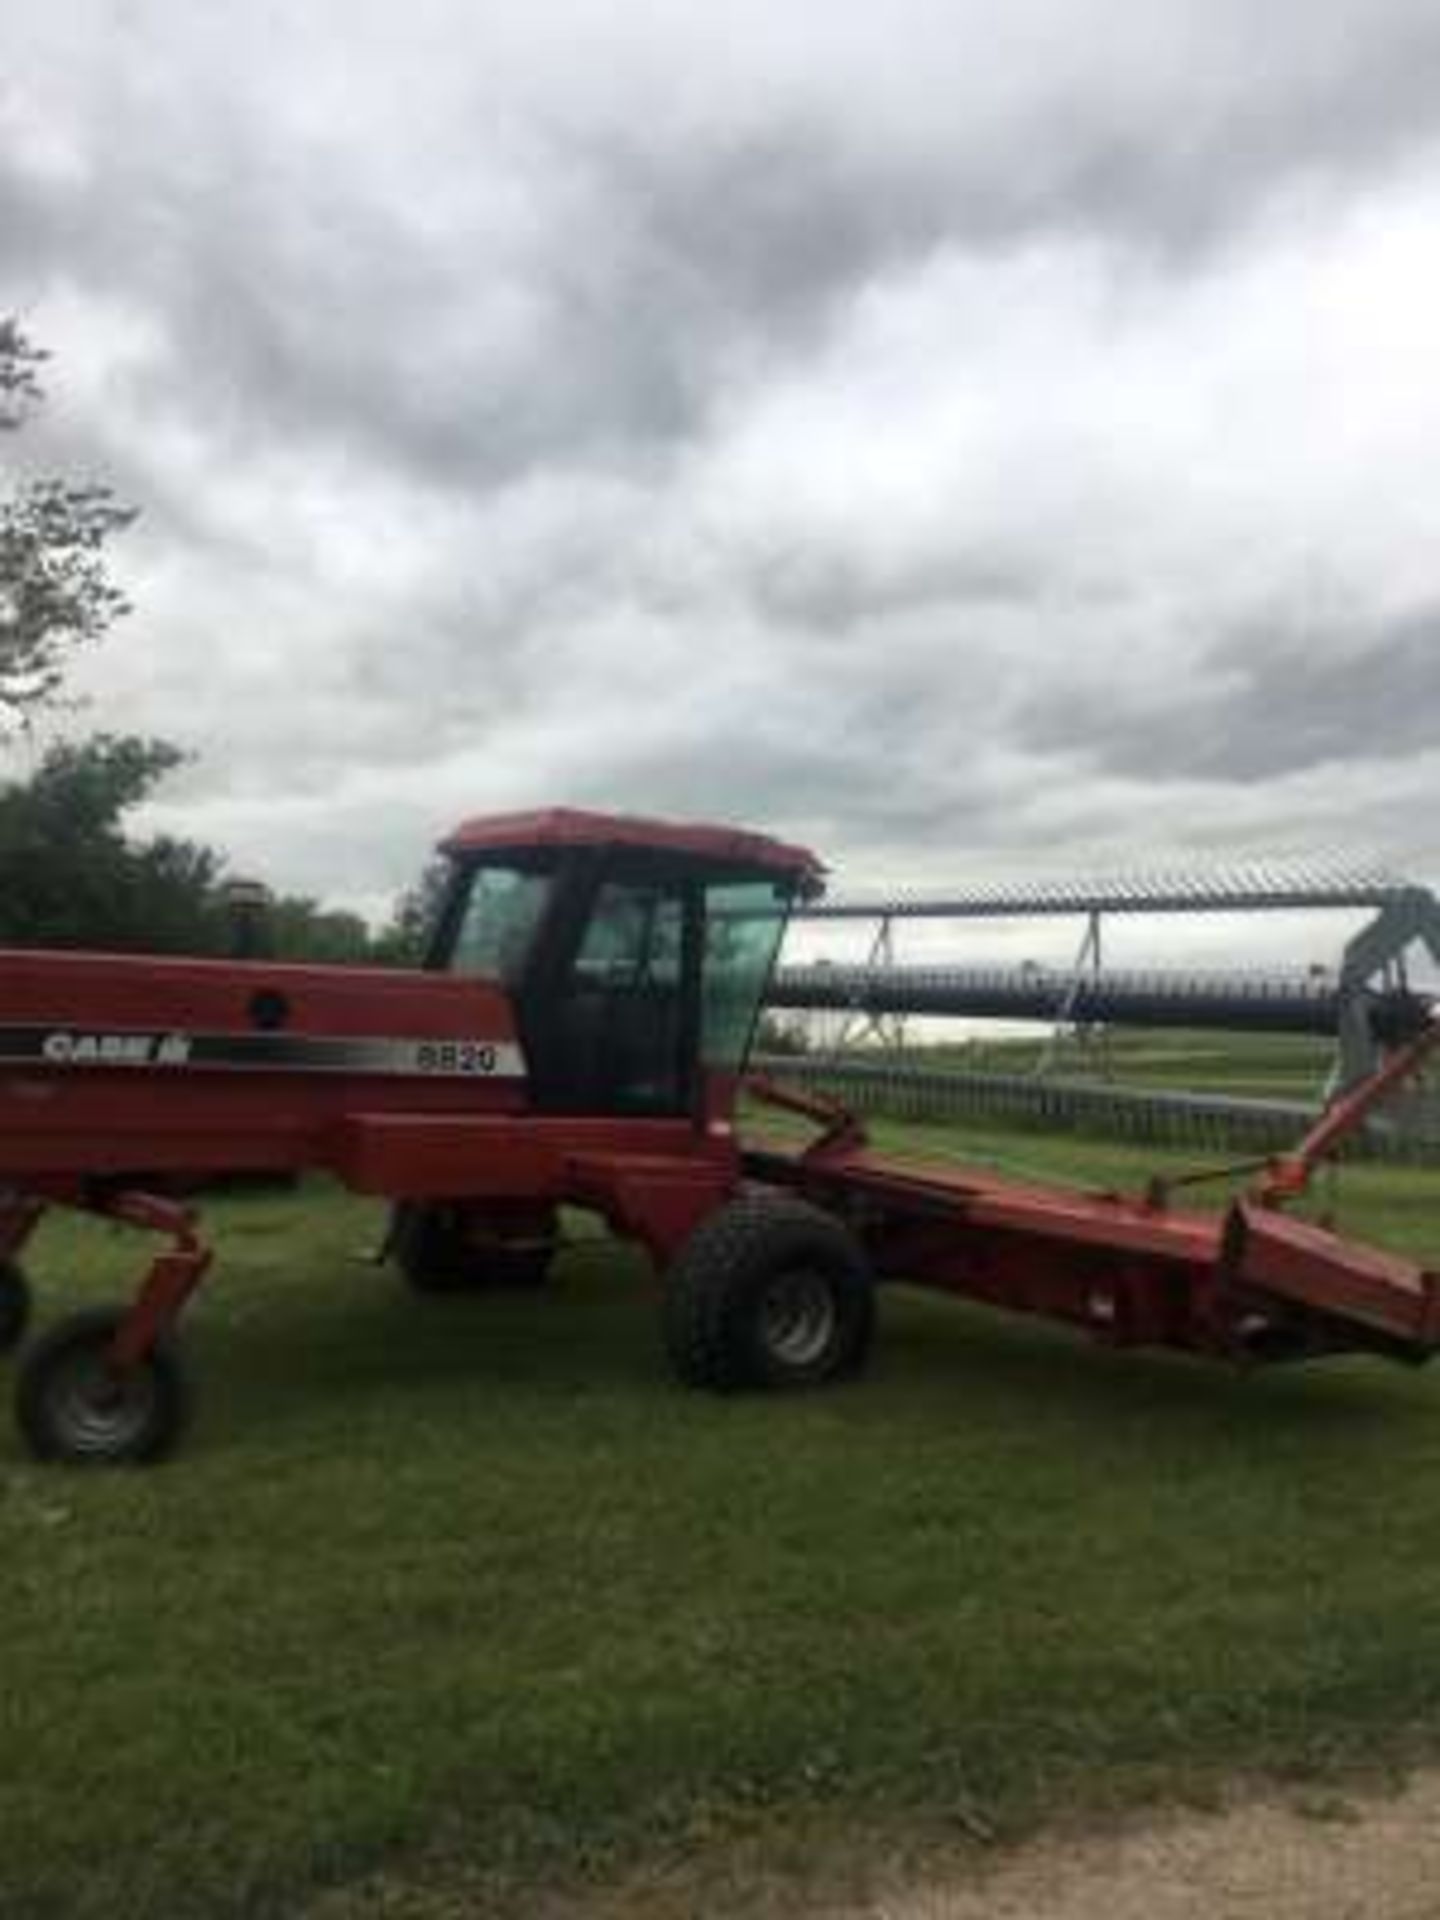 1997 Case IH #8820 S.P. swather, cab, 25ft table (shifting), PU reels, tires good, 1910 hrs (nice - Image 2 of 9